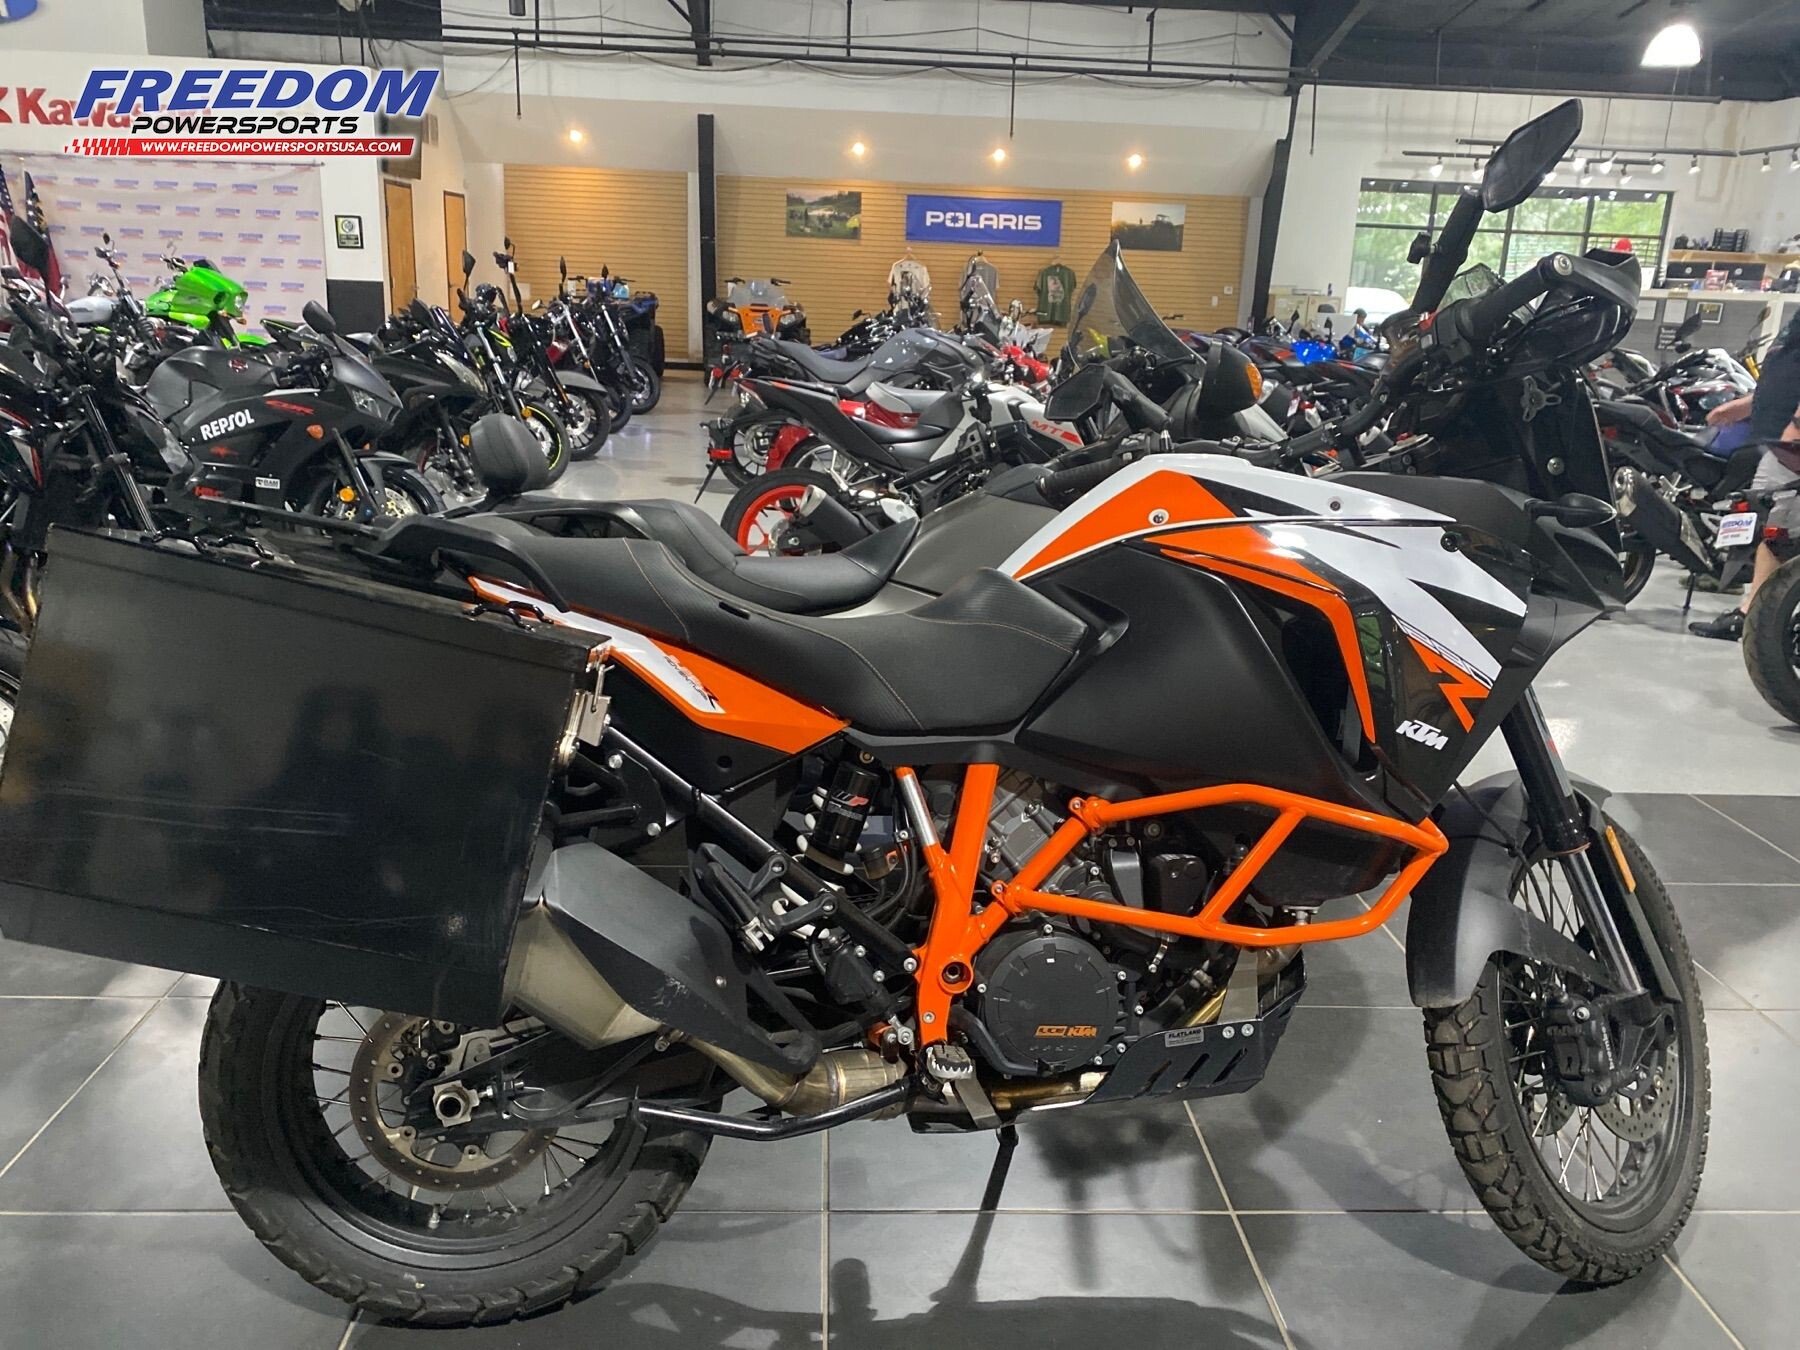 ktm motorcycles for sale near me